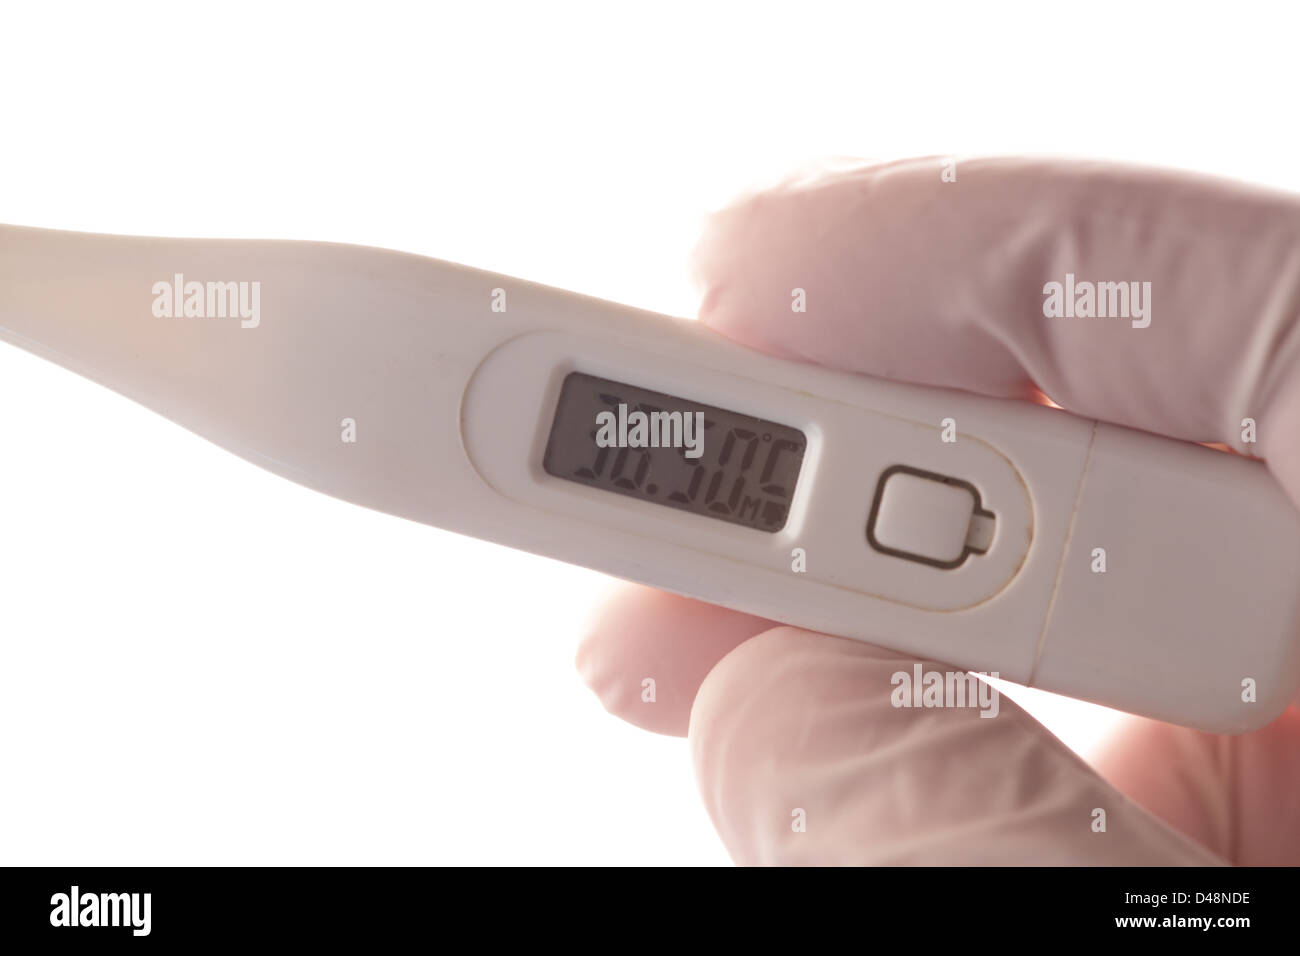 Hand Holding A Thermometer Outside by Stocksy Contributor B & J - Stocksy